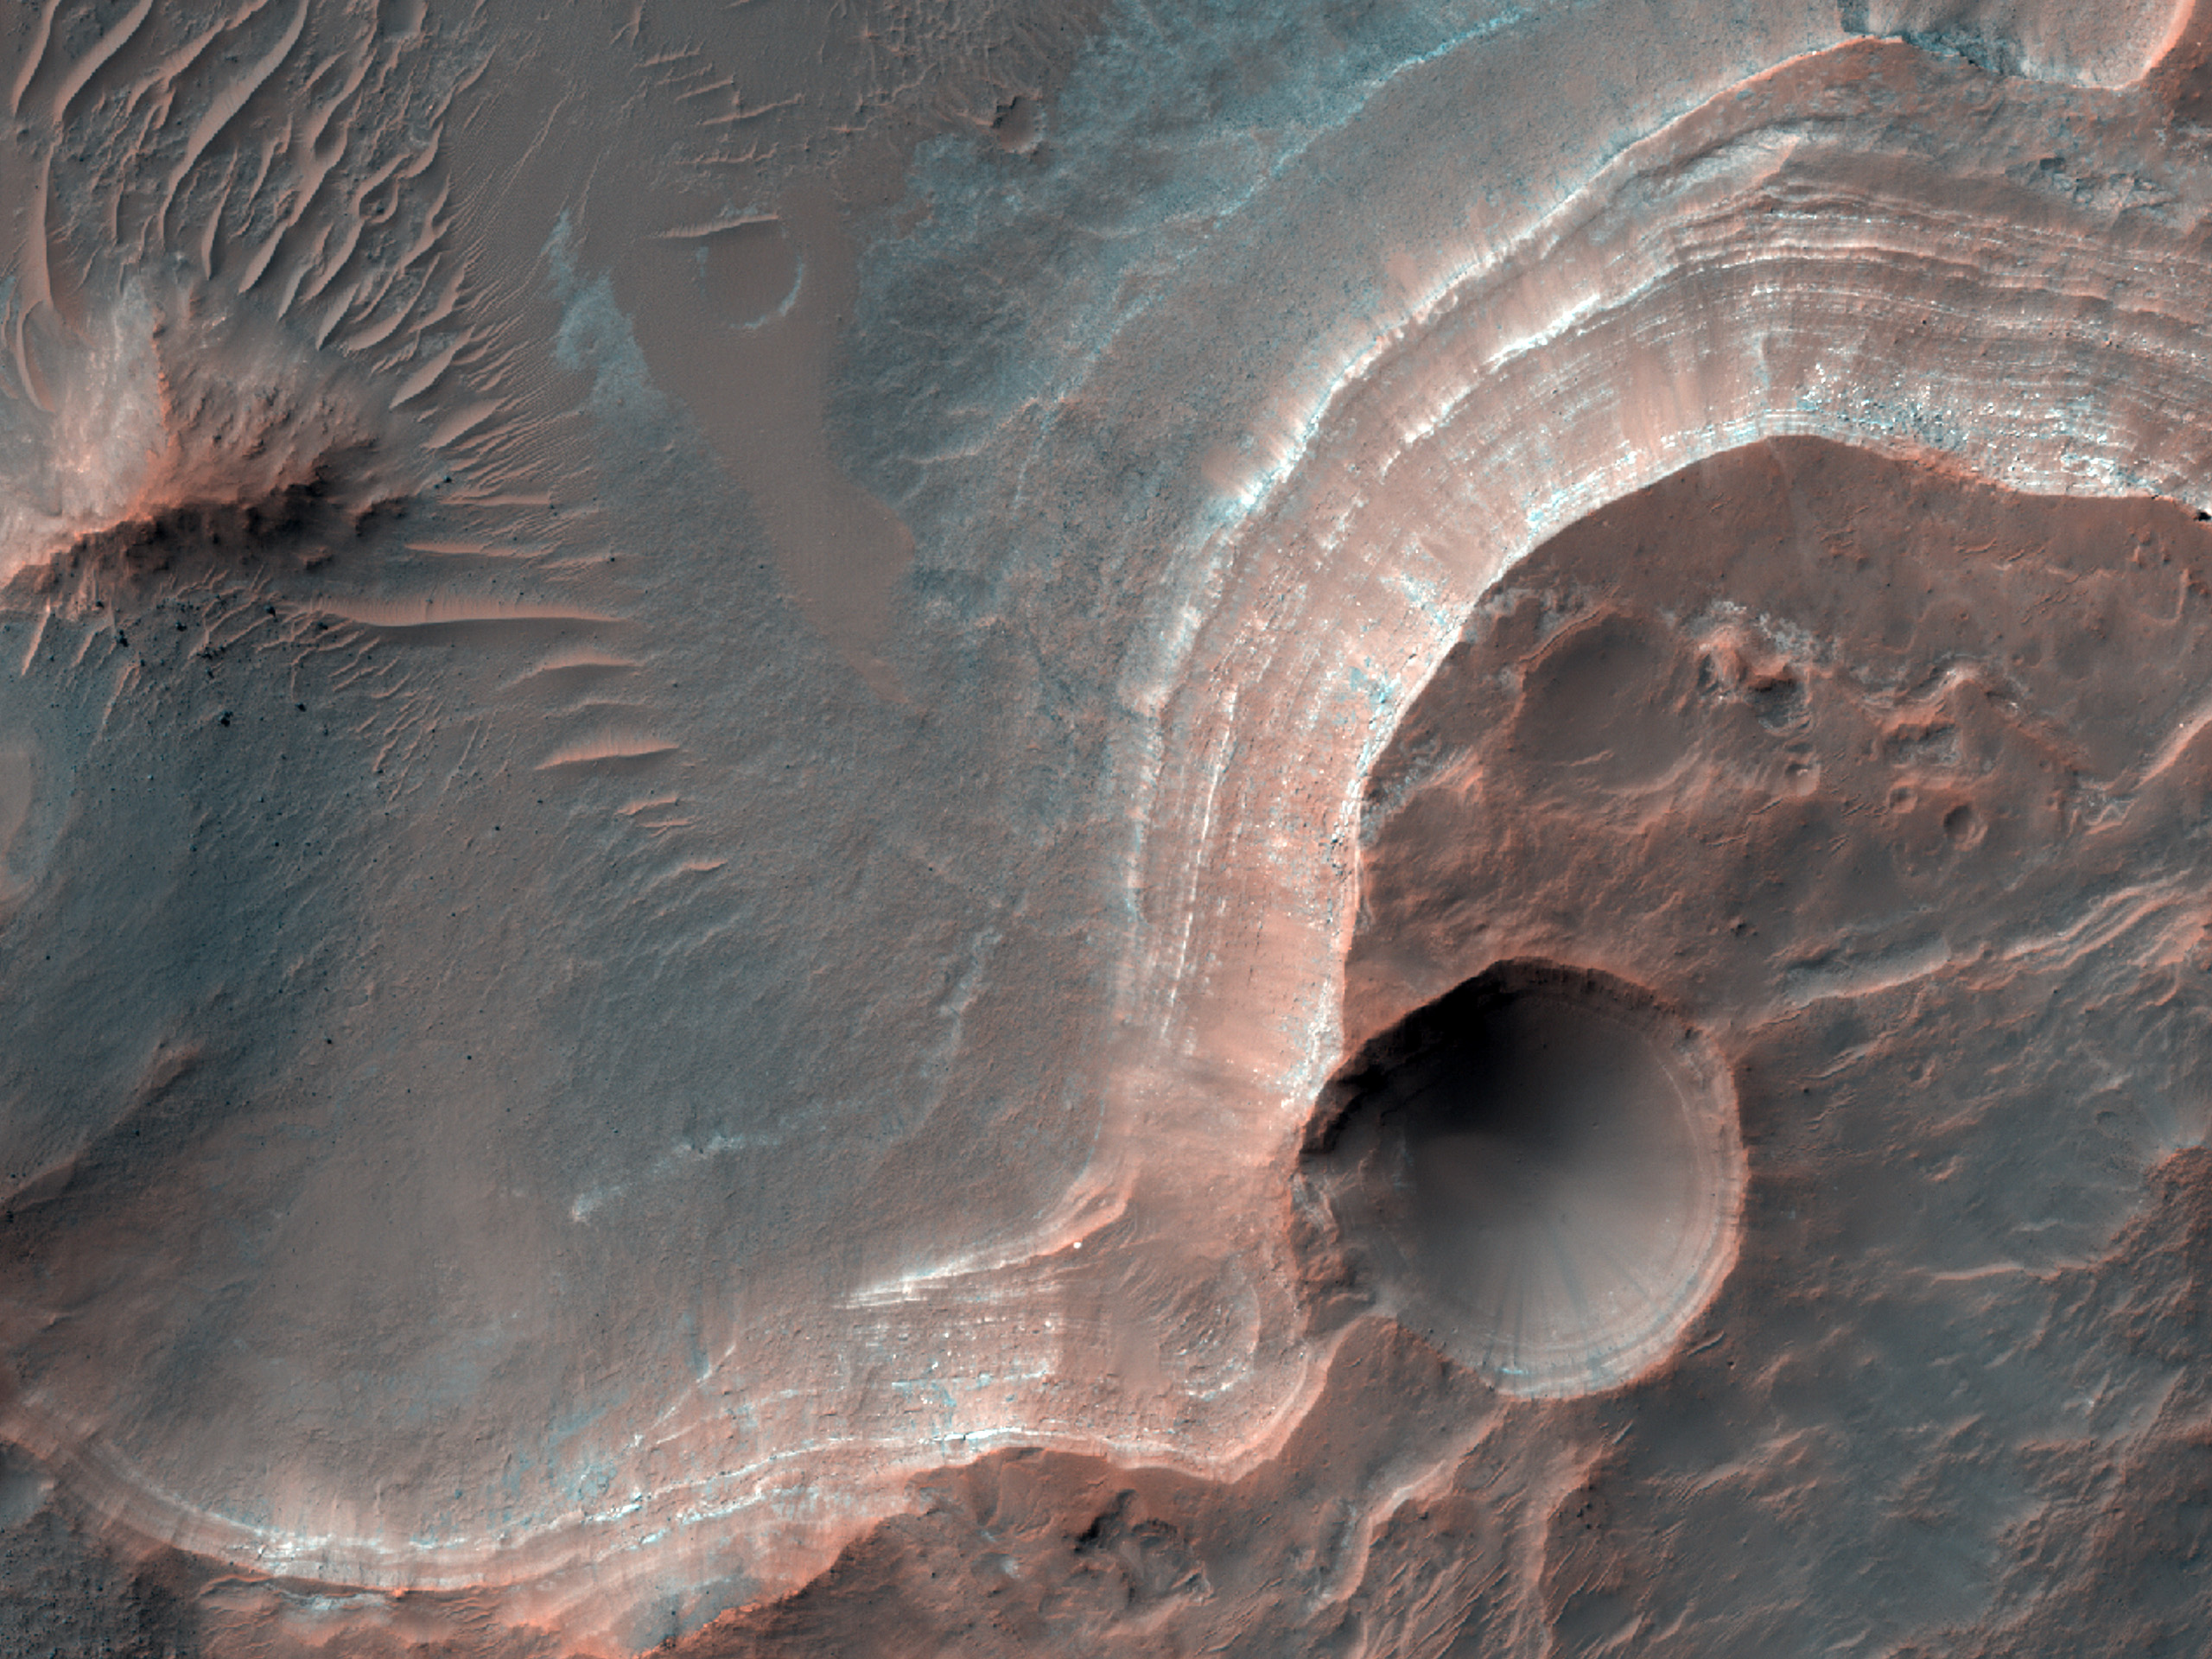 Stratigraphy of Potential Hydrothermal System in Cross Crater